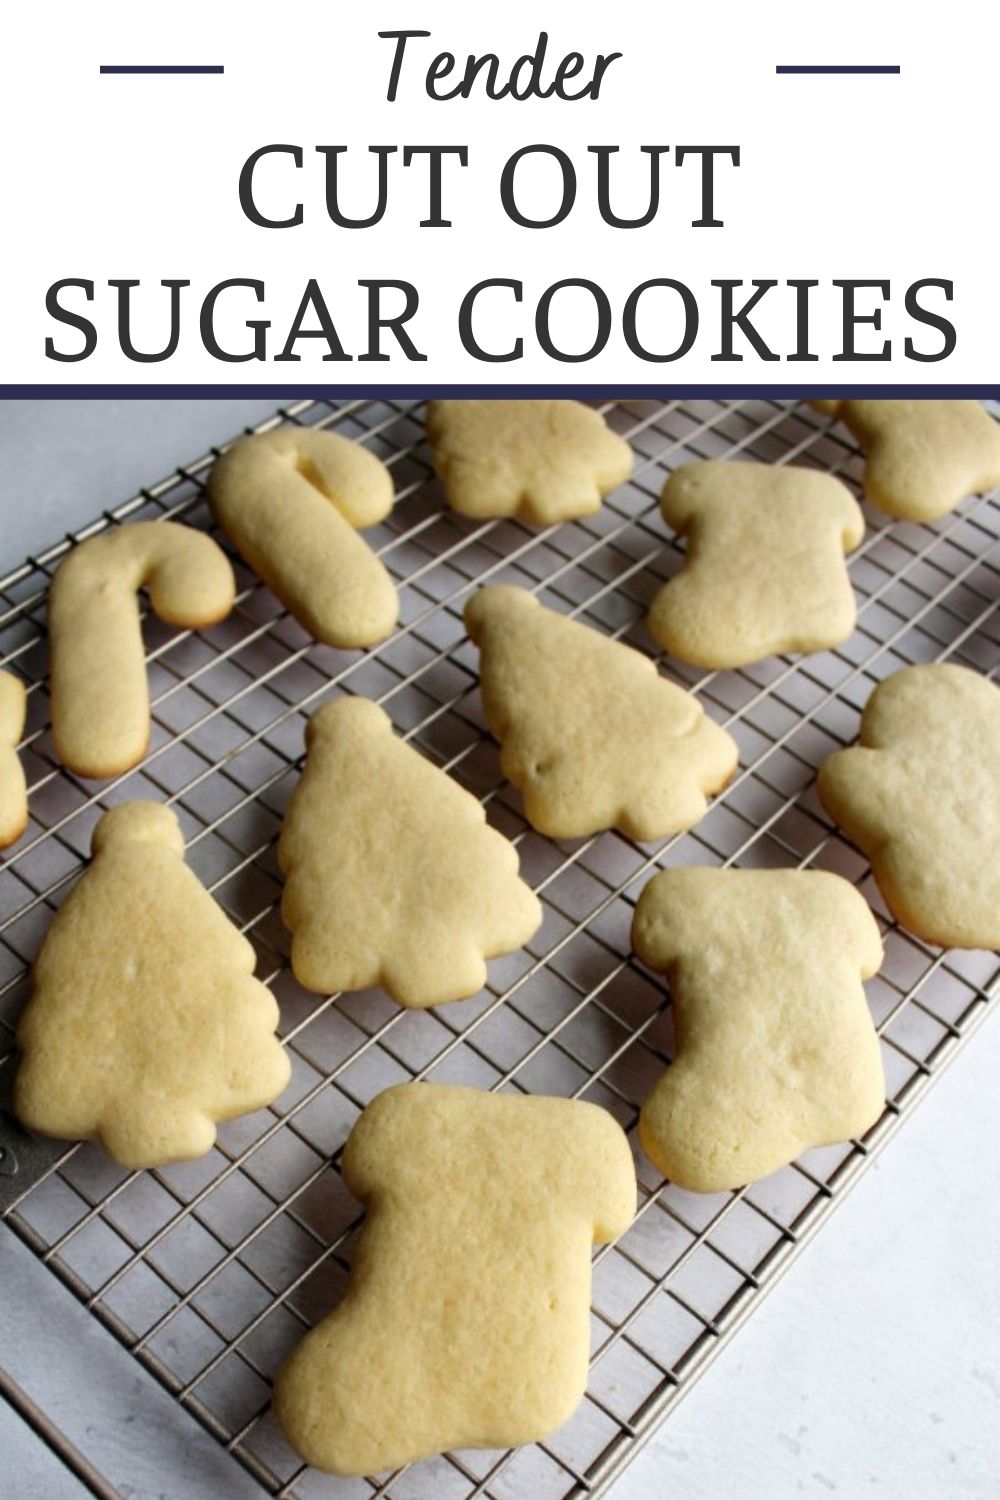 These are my favorite sugar cookies to roll-out, cut and decorate.  The dough is easy to work with, not too stiff, not too sticky and they taste delicious!